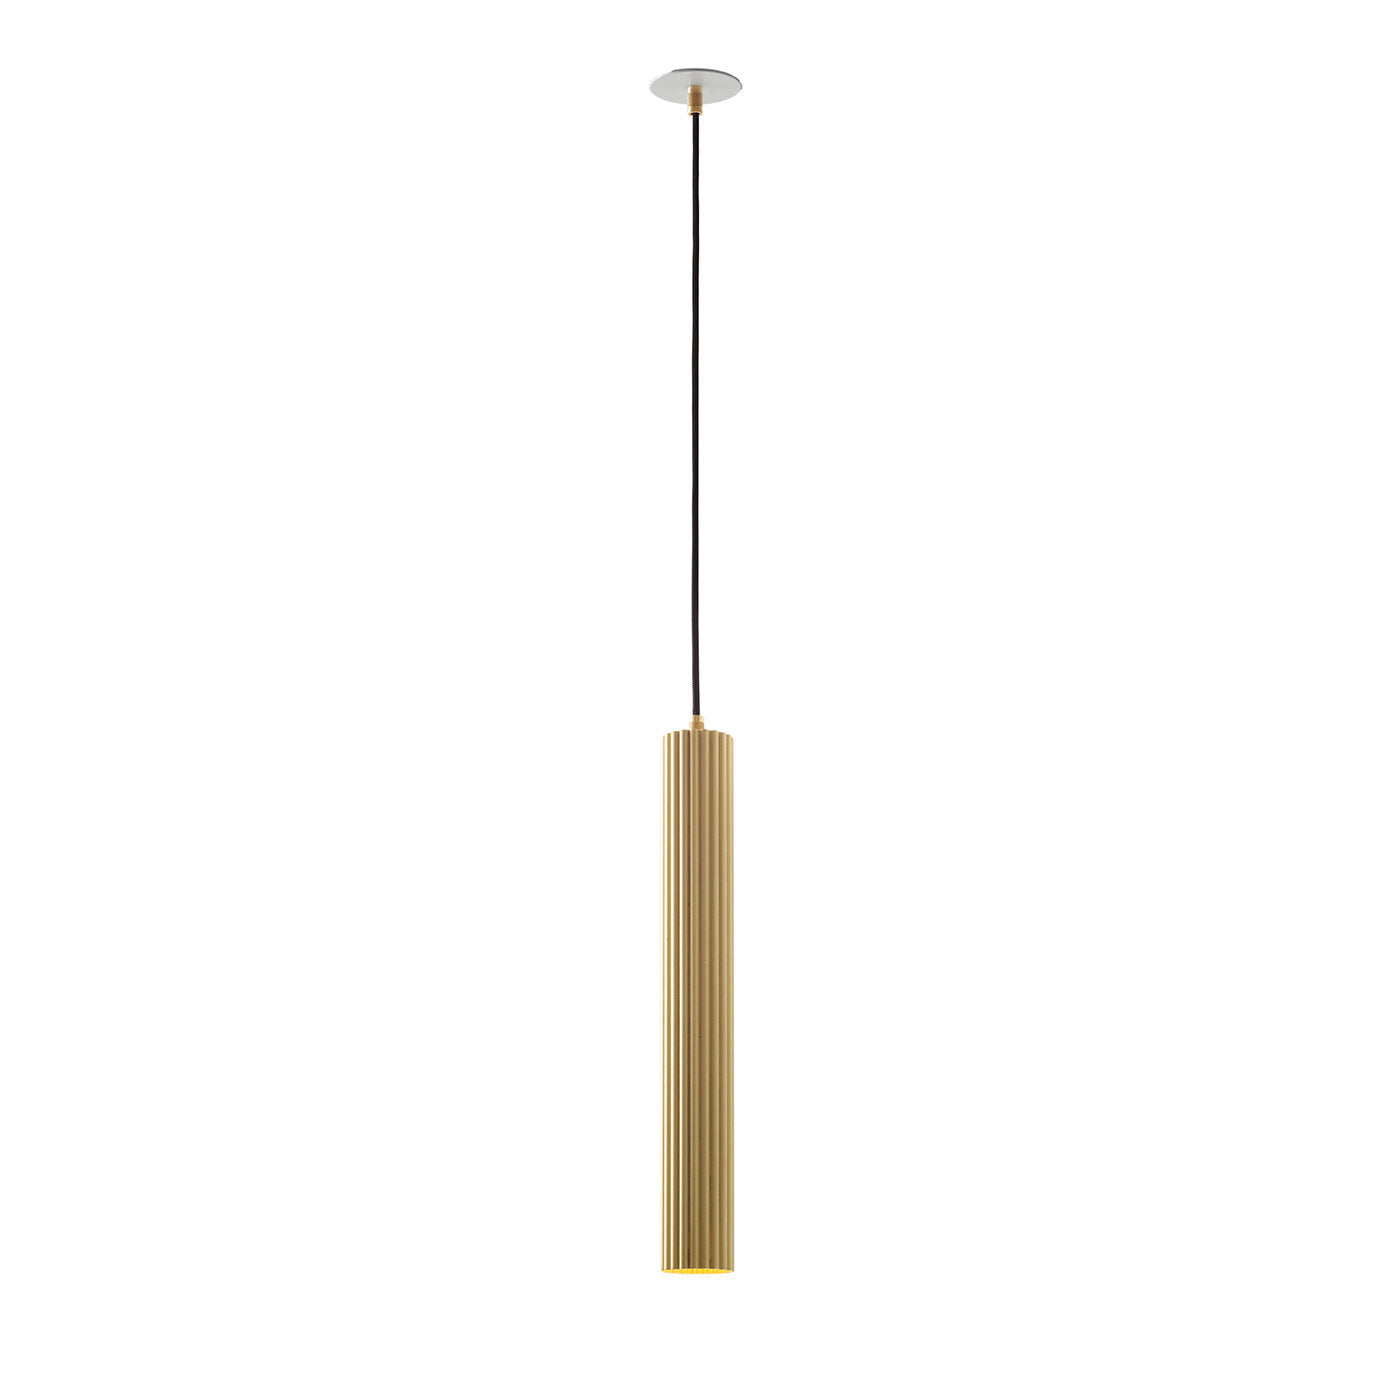 Lustrin Striped Pendant Lamp by Isacco Brioschi - Main view